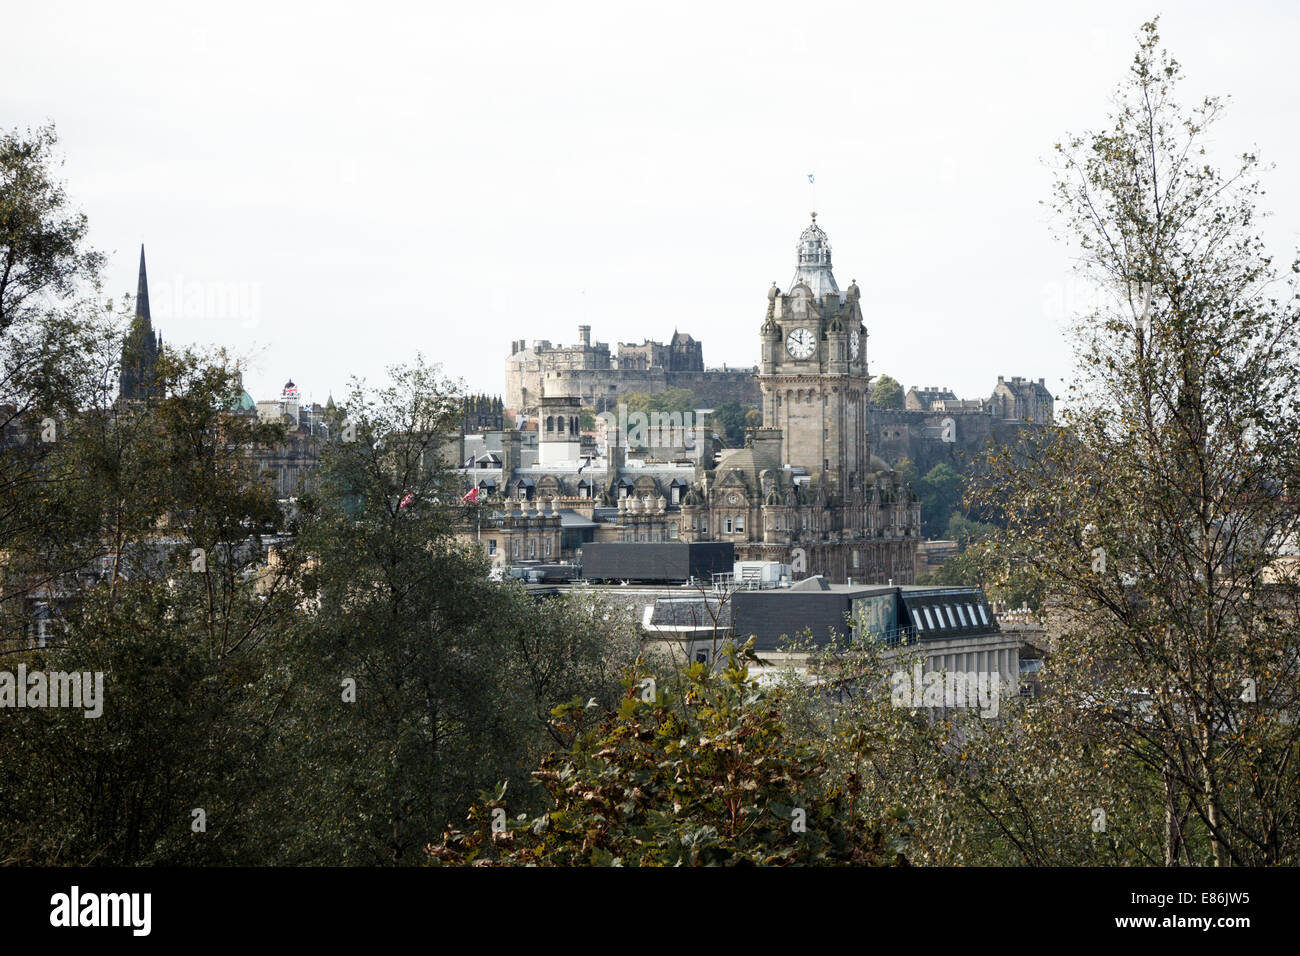 Edinburgh Castle and the Balmoral Hotel framed by trees. Stock Photo